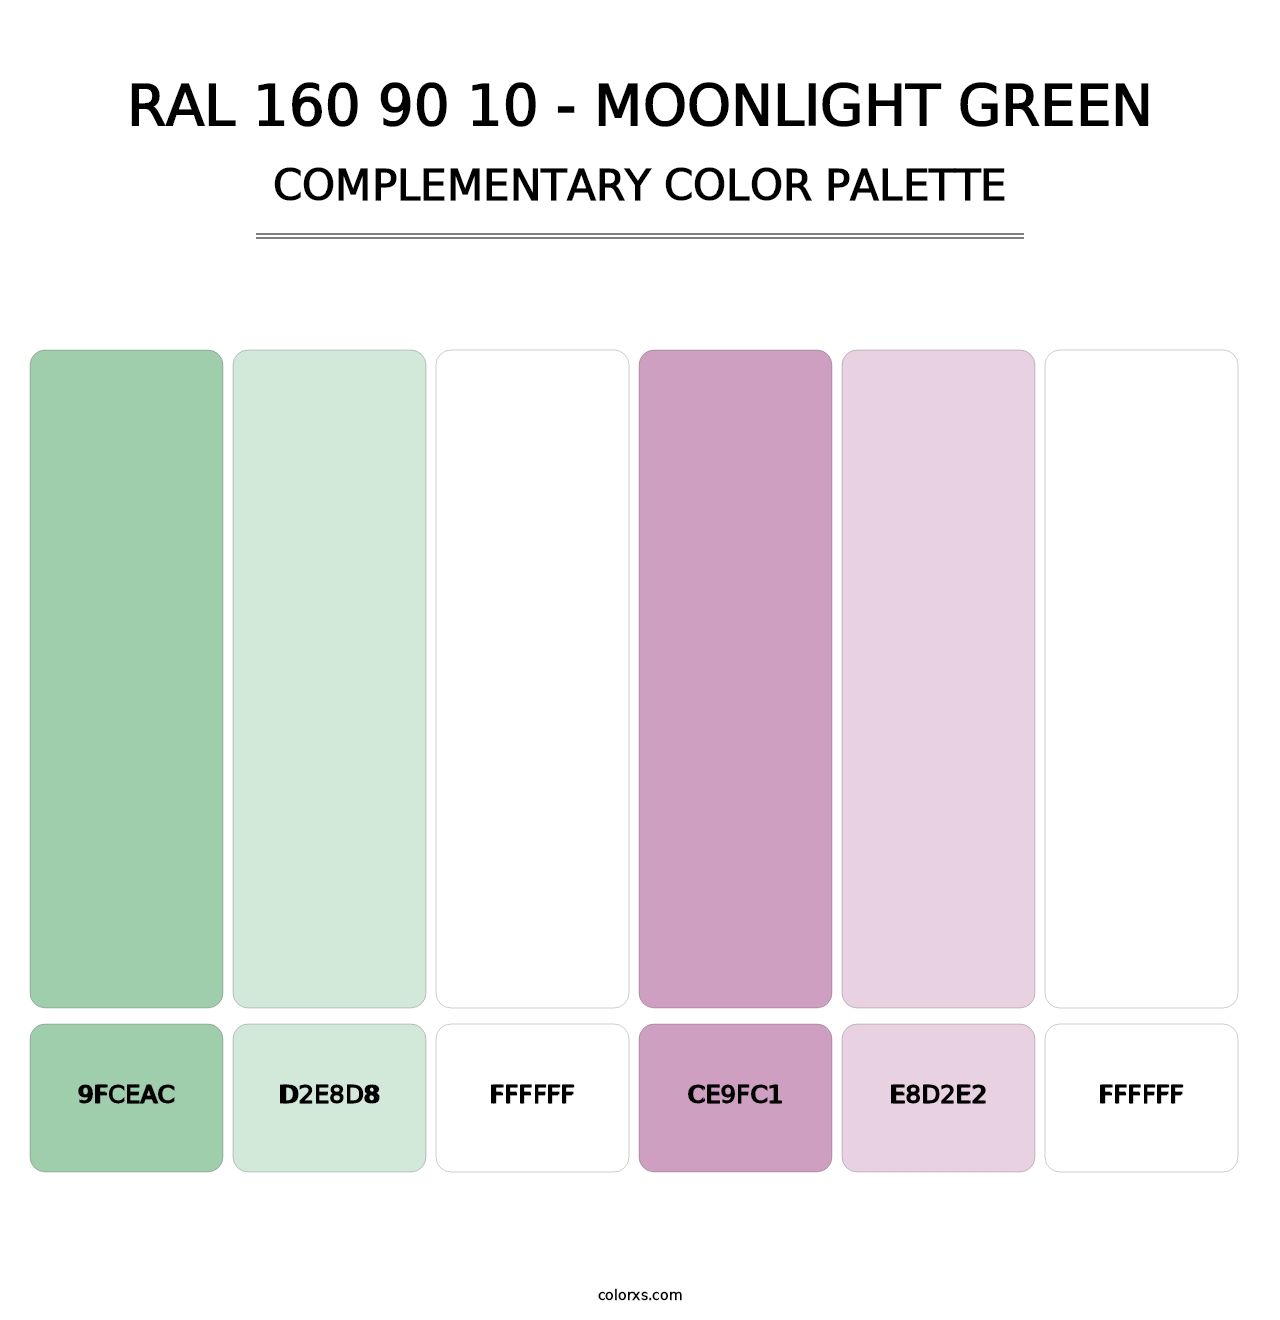 RAL 160 90 10 - Moonlight Green - Complementary Color Palette